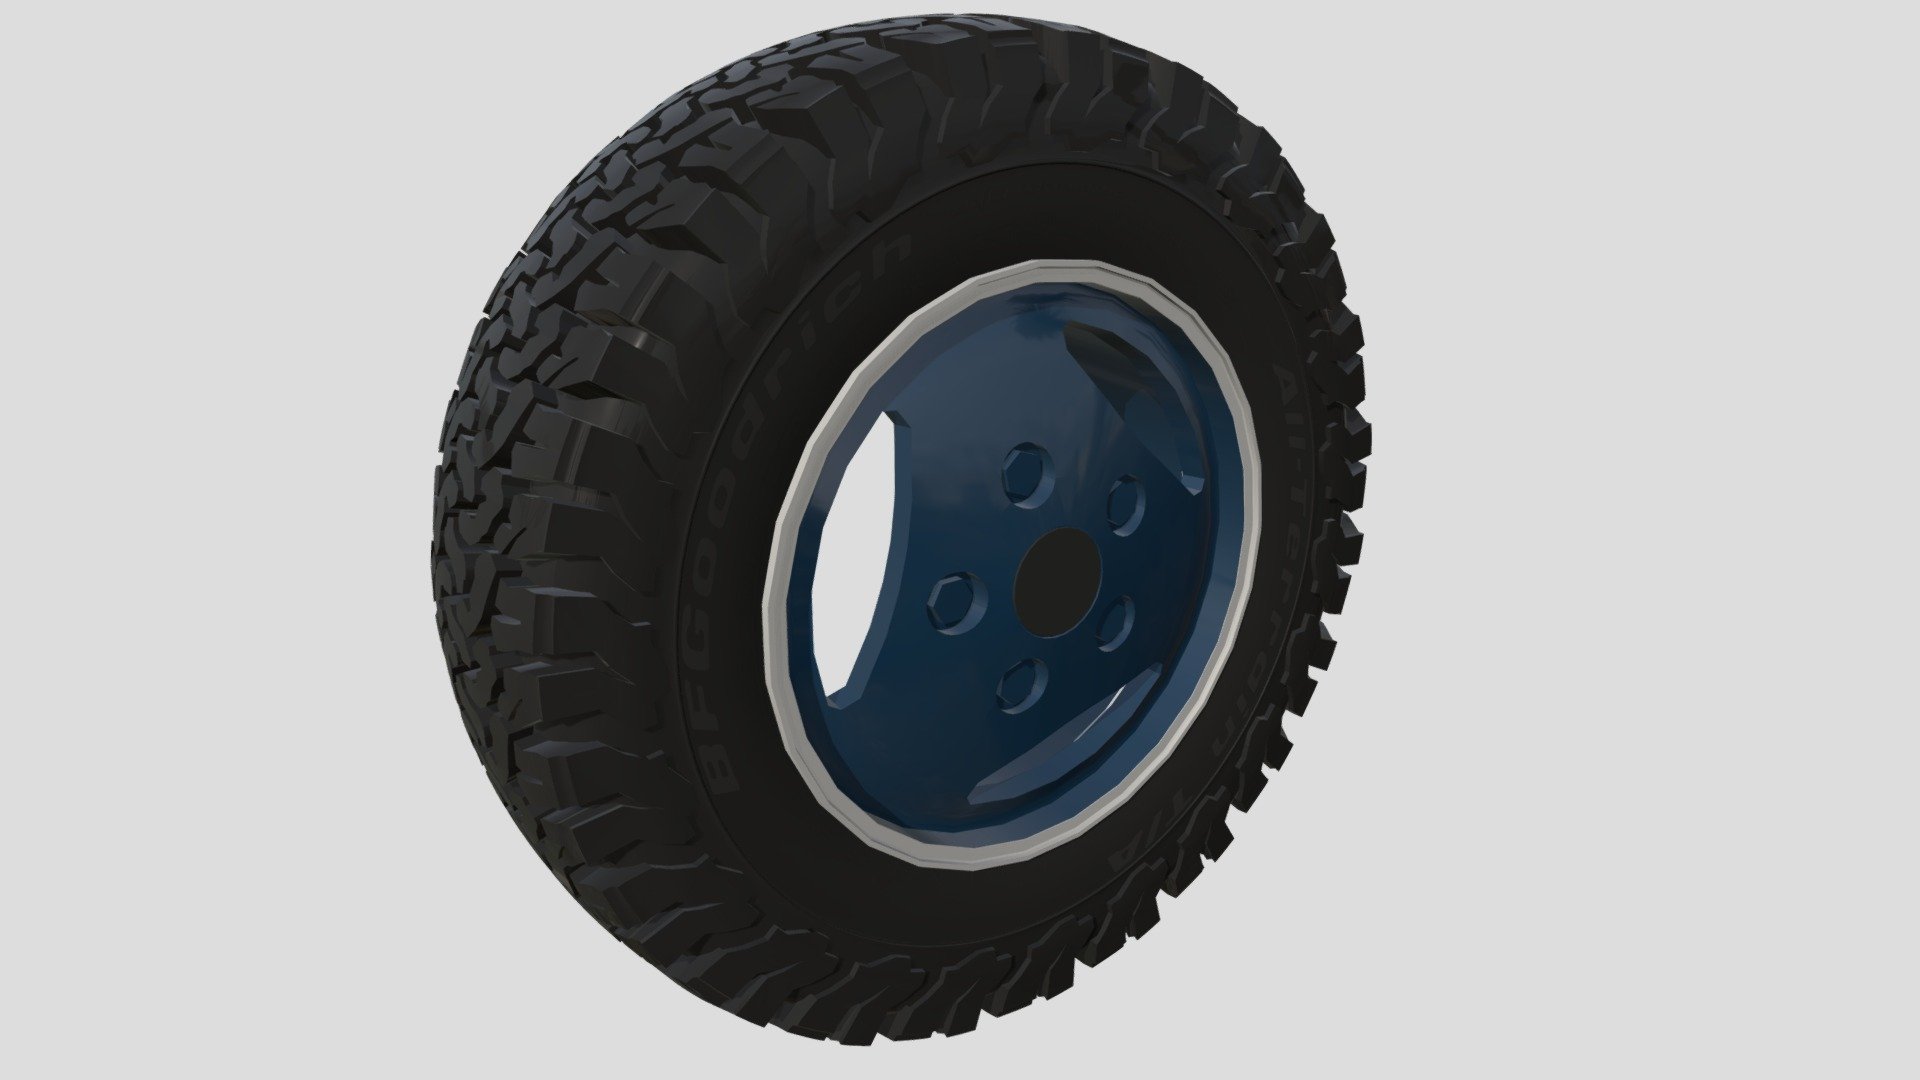 Range Rover Classic Wheel Maxxis Trepador 3d model rendered with Cycles in Blender, as per seen on attached images.

File formats:
-.blend, rendered with cycles, as seen in the images;
-.obj, with materials applied;
-.dae, with materials applied;
-.fbx, with material slots applied;
-.stl;

Files come named appropriately and split by file format.

3D Software:
The 3D model was originally created in Blender 2.79 and rendered with Cycles.

Materials and textures:
The models have materials applied in all formats, and are ready to import and render.

Preview scenes:
The preview images are rendered in Blender using its built-in render engine &lsquo;Cycles'.
Note that the blend files come directly with the rendering scene included and the render command will generate the exact result as seen in previews.
Scene elements are on a different layer from the actual model for easier manipulation of objects 3d model